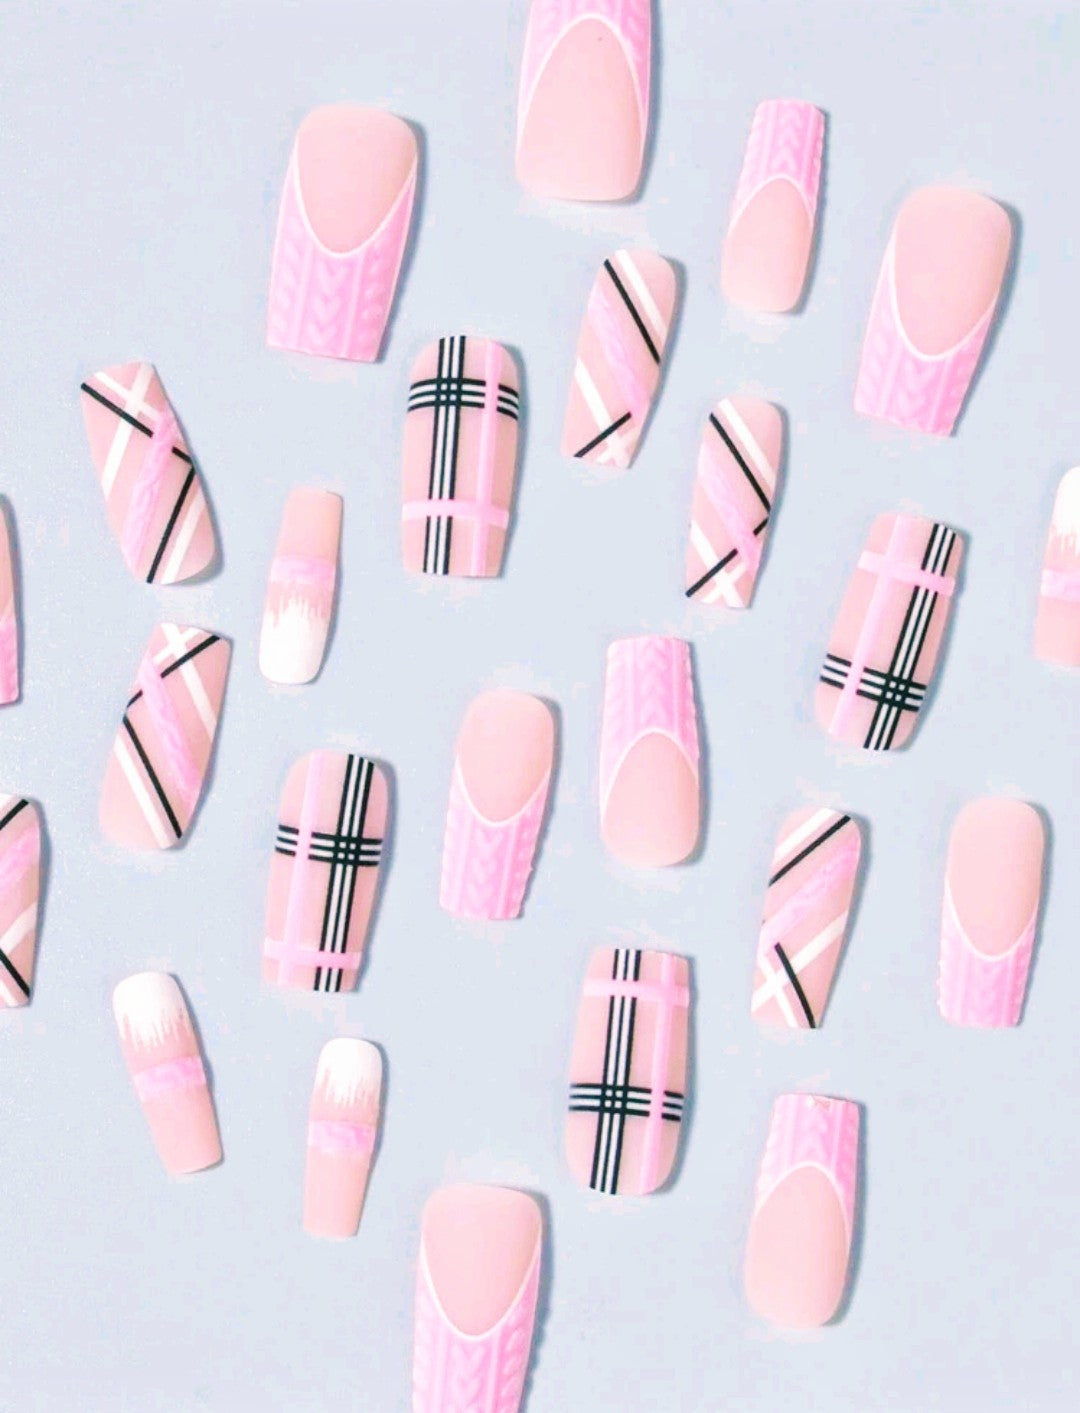 &quot;Pink Plaid&quot; 24 piece press on long french tip acrylic nails with glue